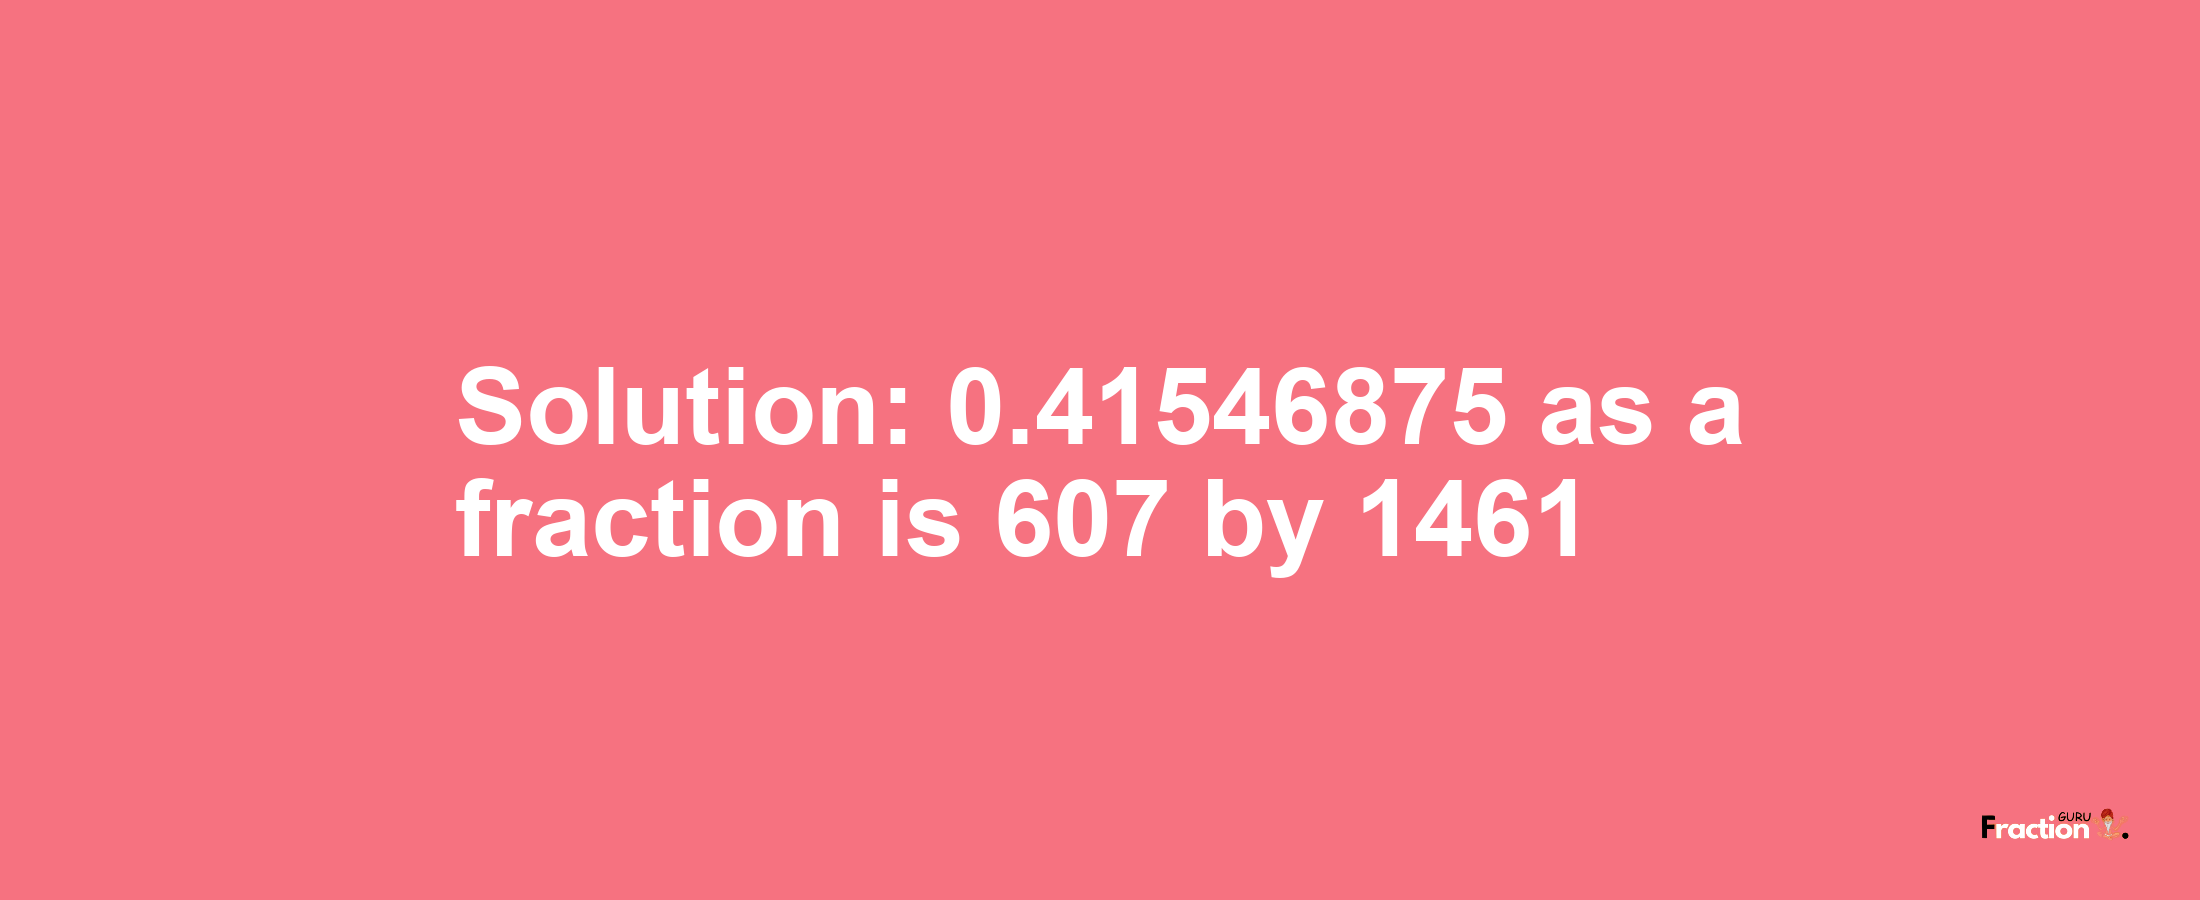 Solution:0.41546875 as a fraction is 607/1461